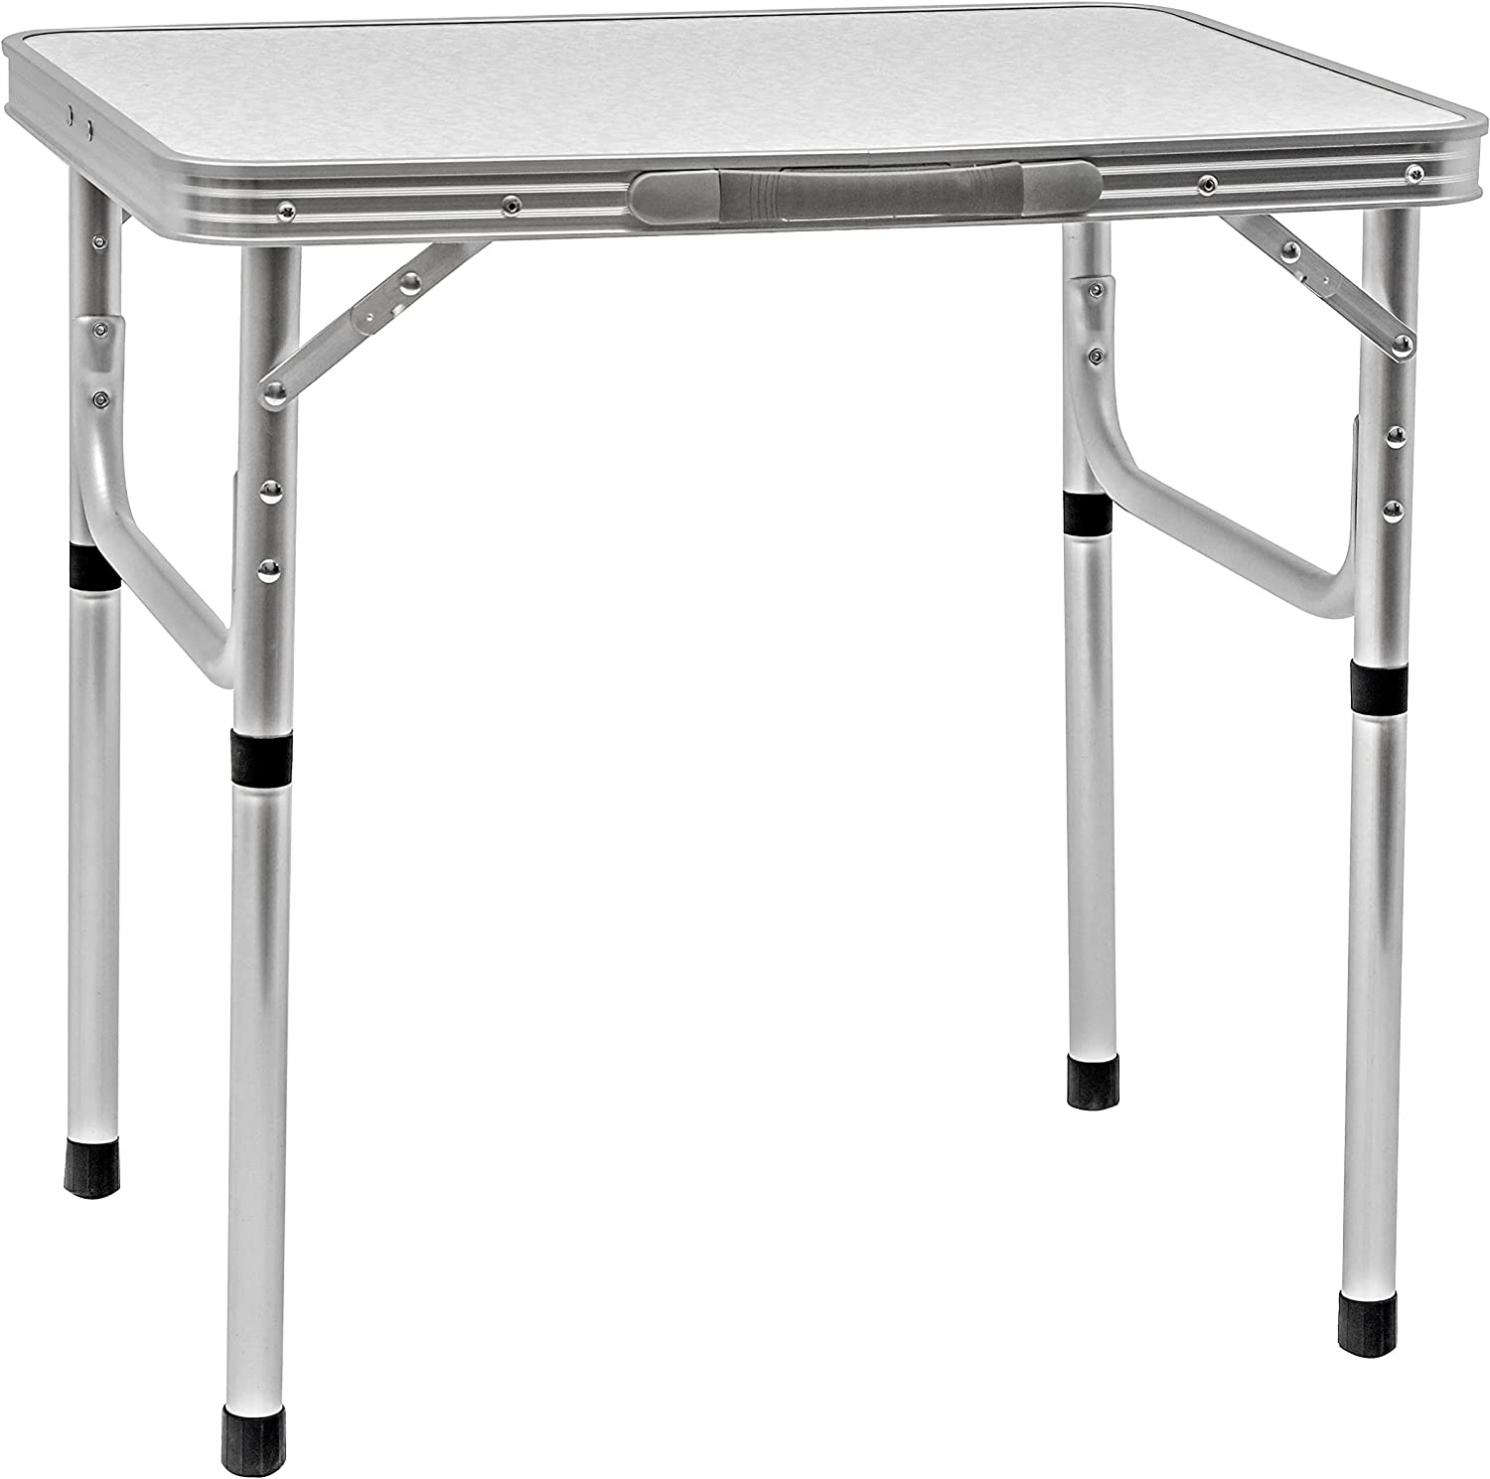 Aluminum Portable Folding Camp Table With Carry Handle - By Trademark Innovations